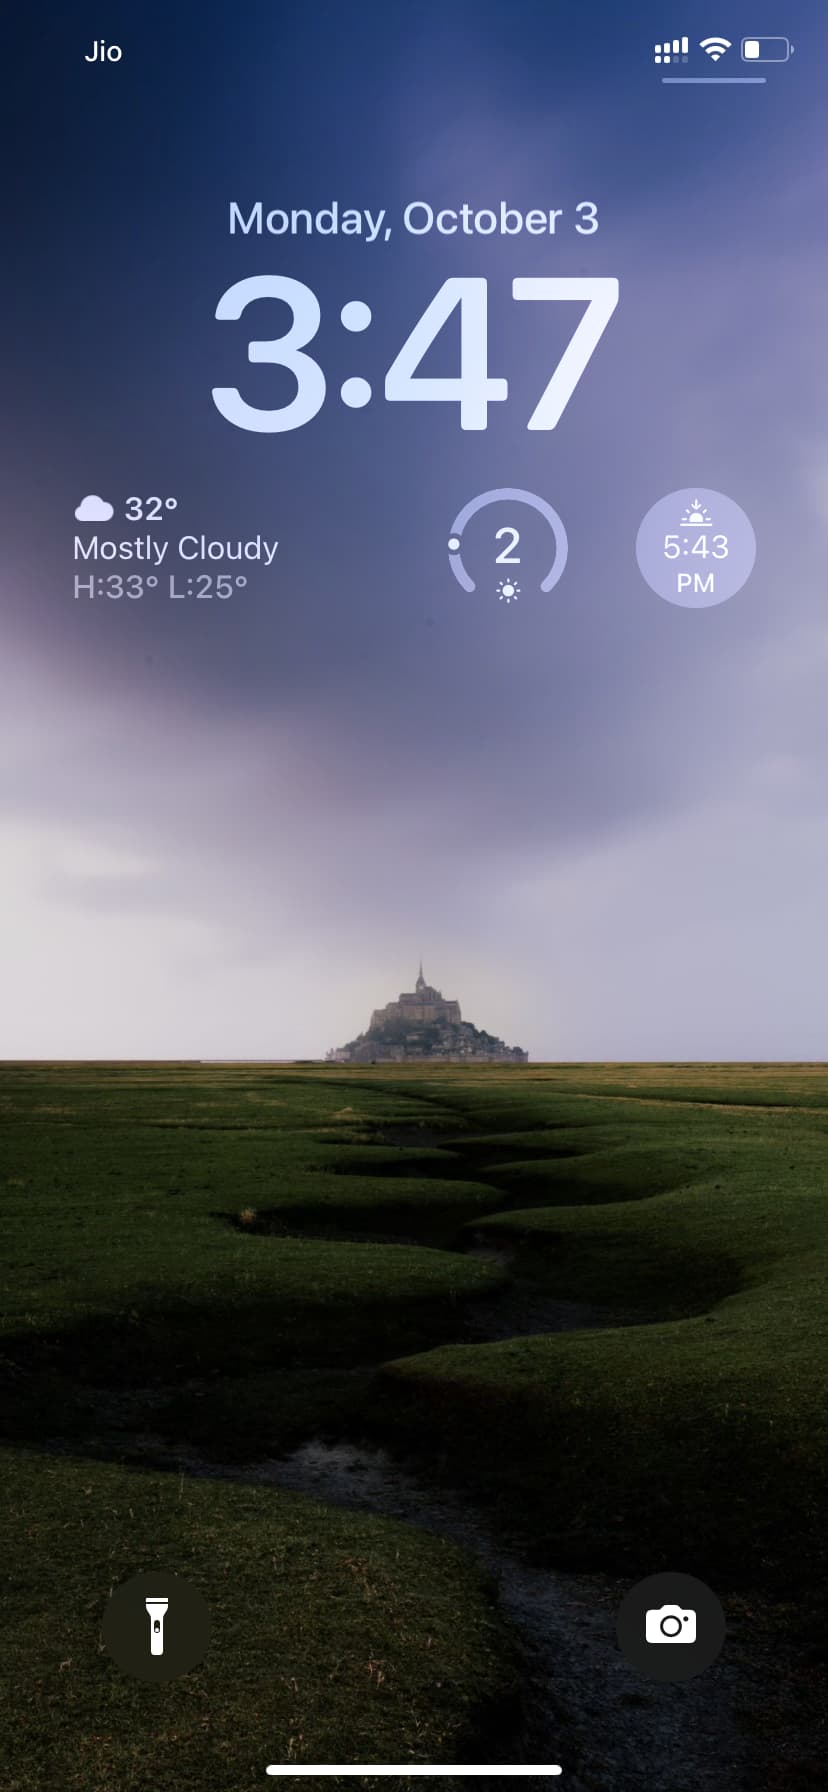 iPhone Lock Screen showing weather conditions